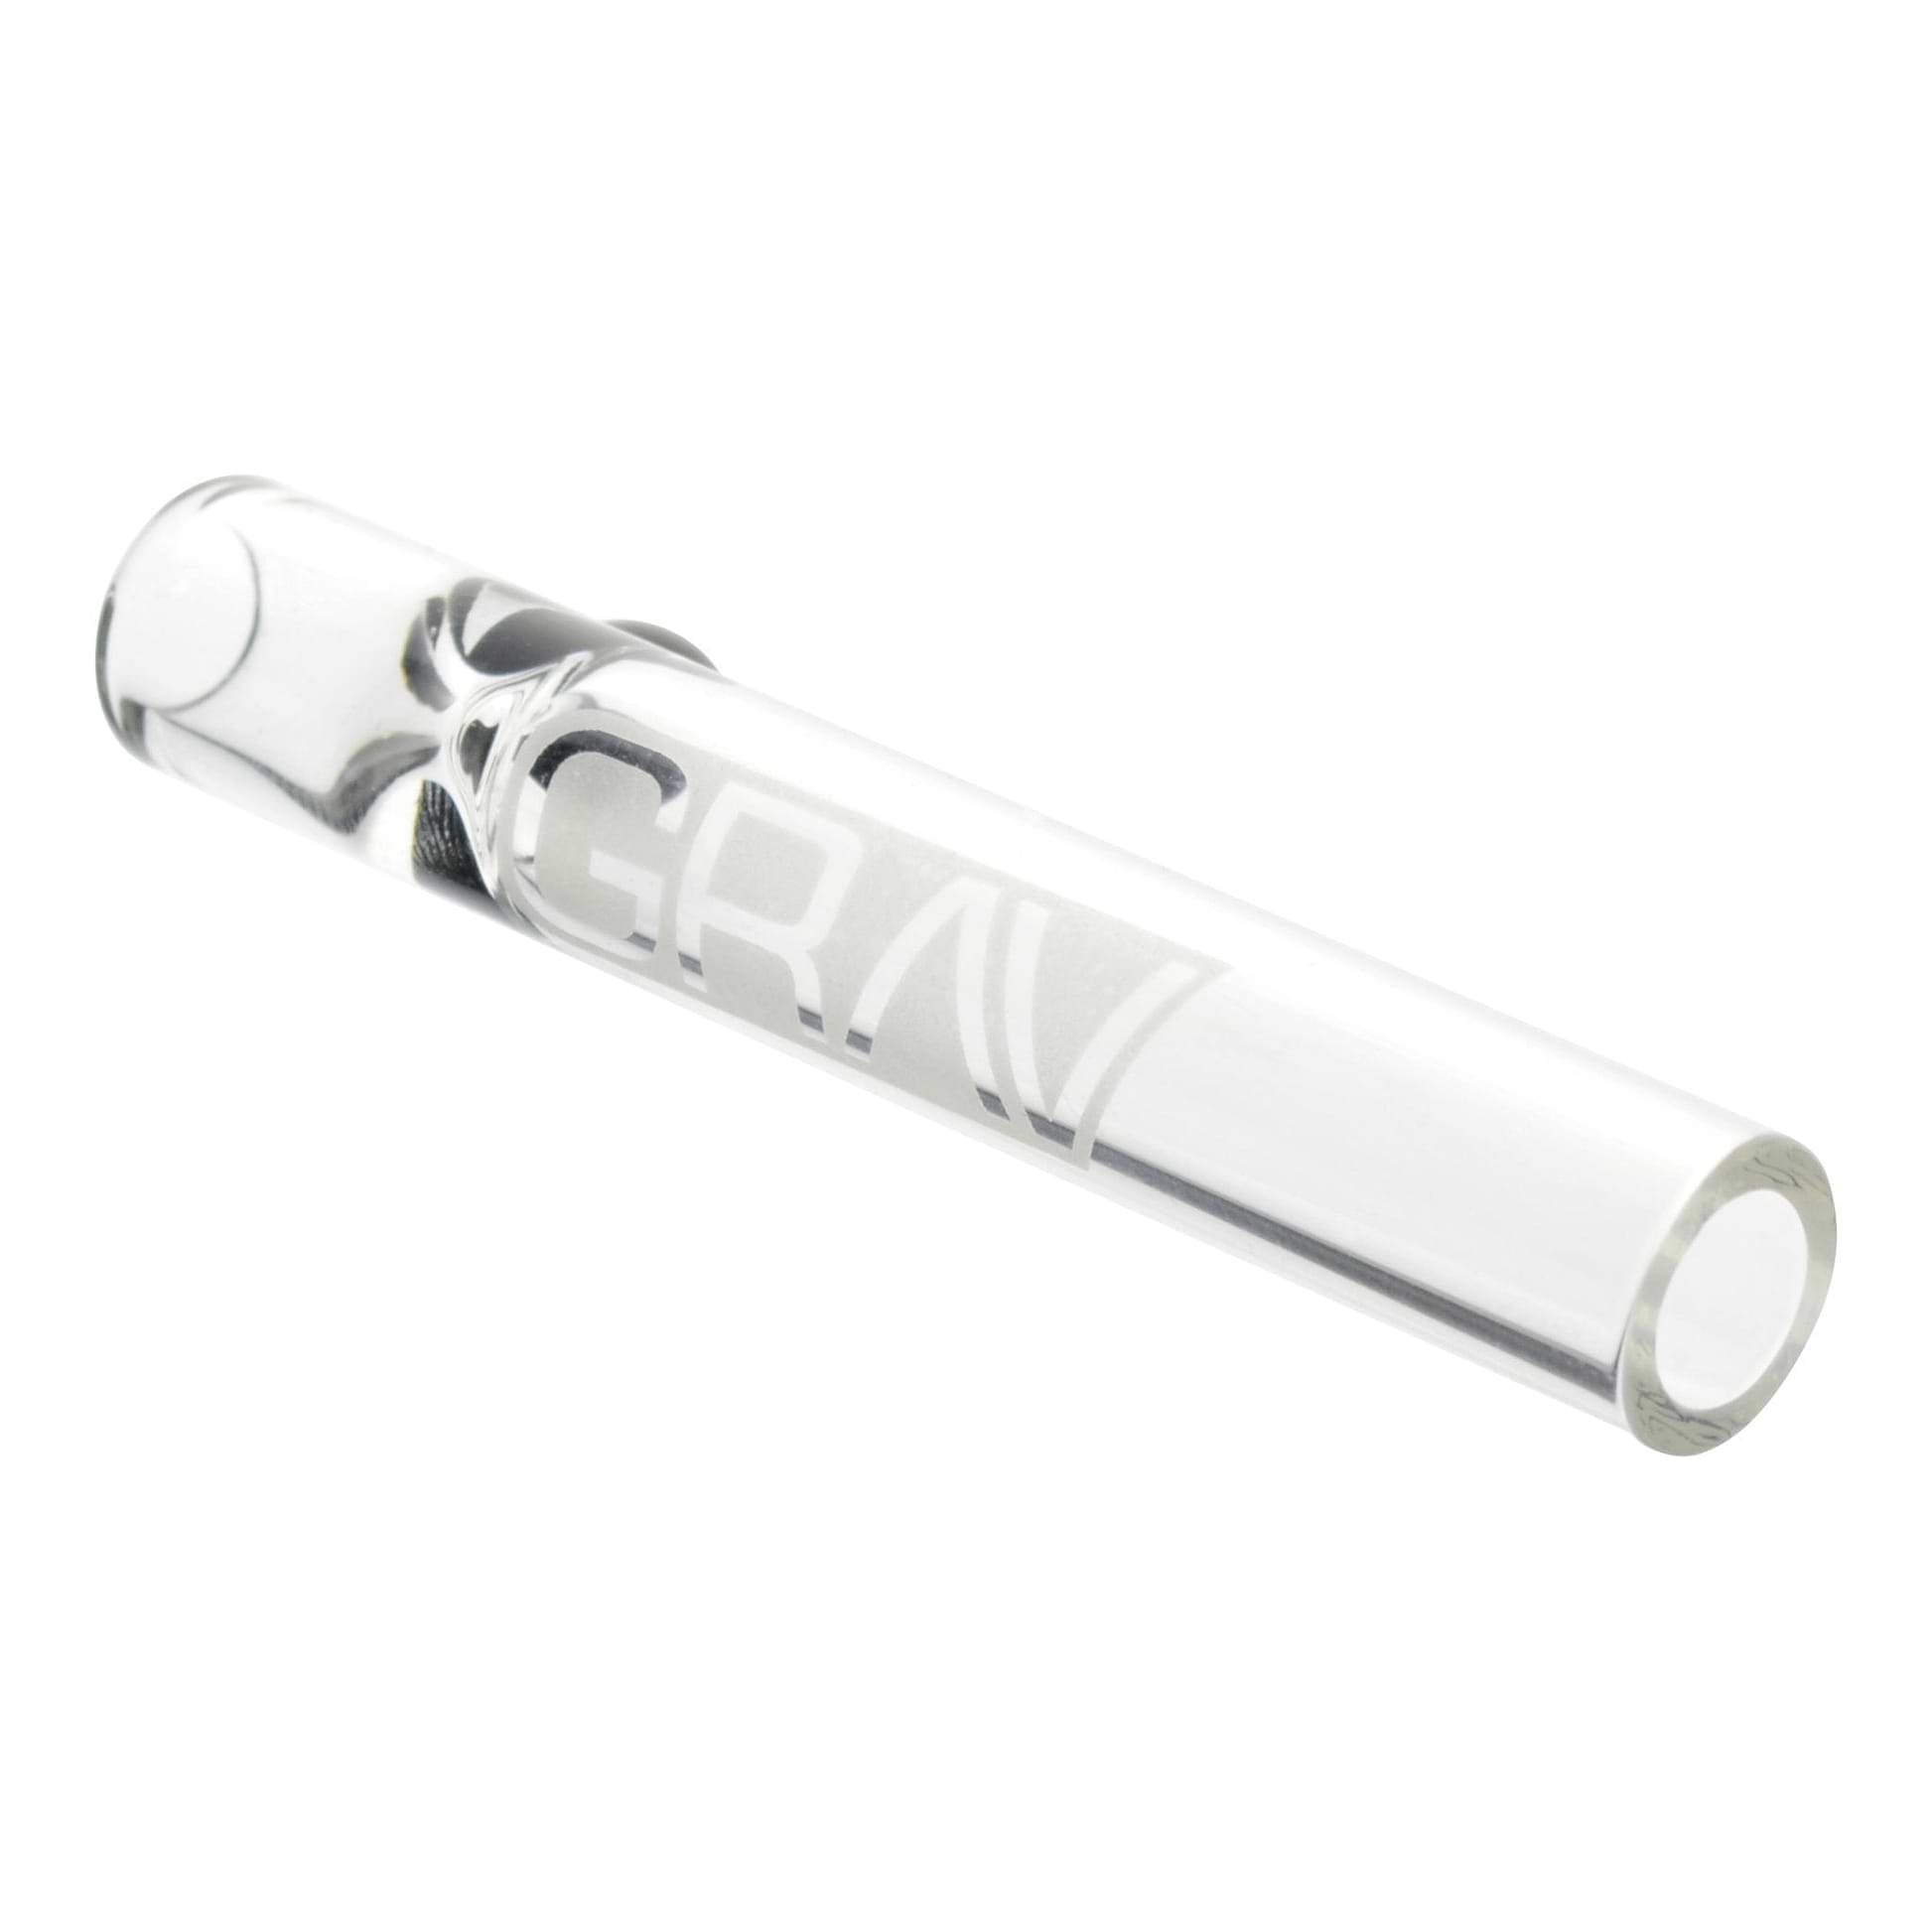 GRAV compact oney one hitter smoking device made of durable borosilicate glass with subtle hues in a clean sophisticated look